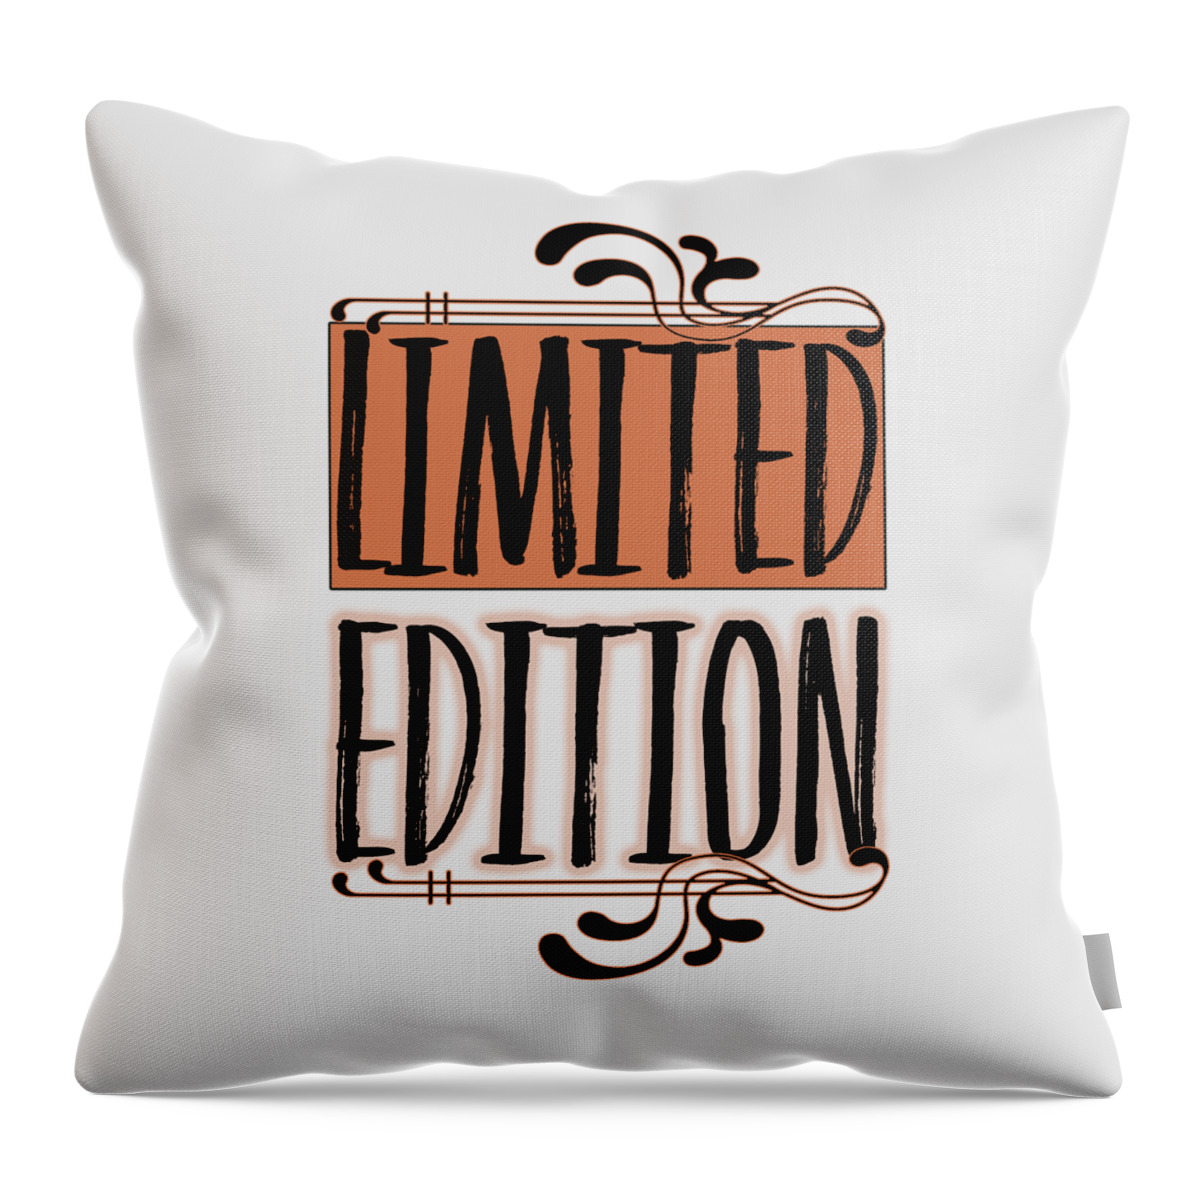 Abstract Throw Pillow featuring the digital art Limited Edition by Melanie Viola